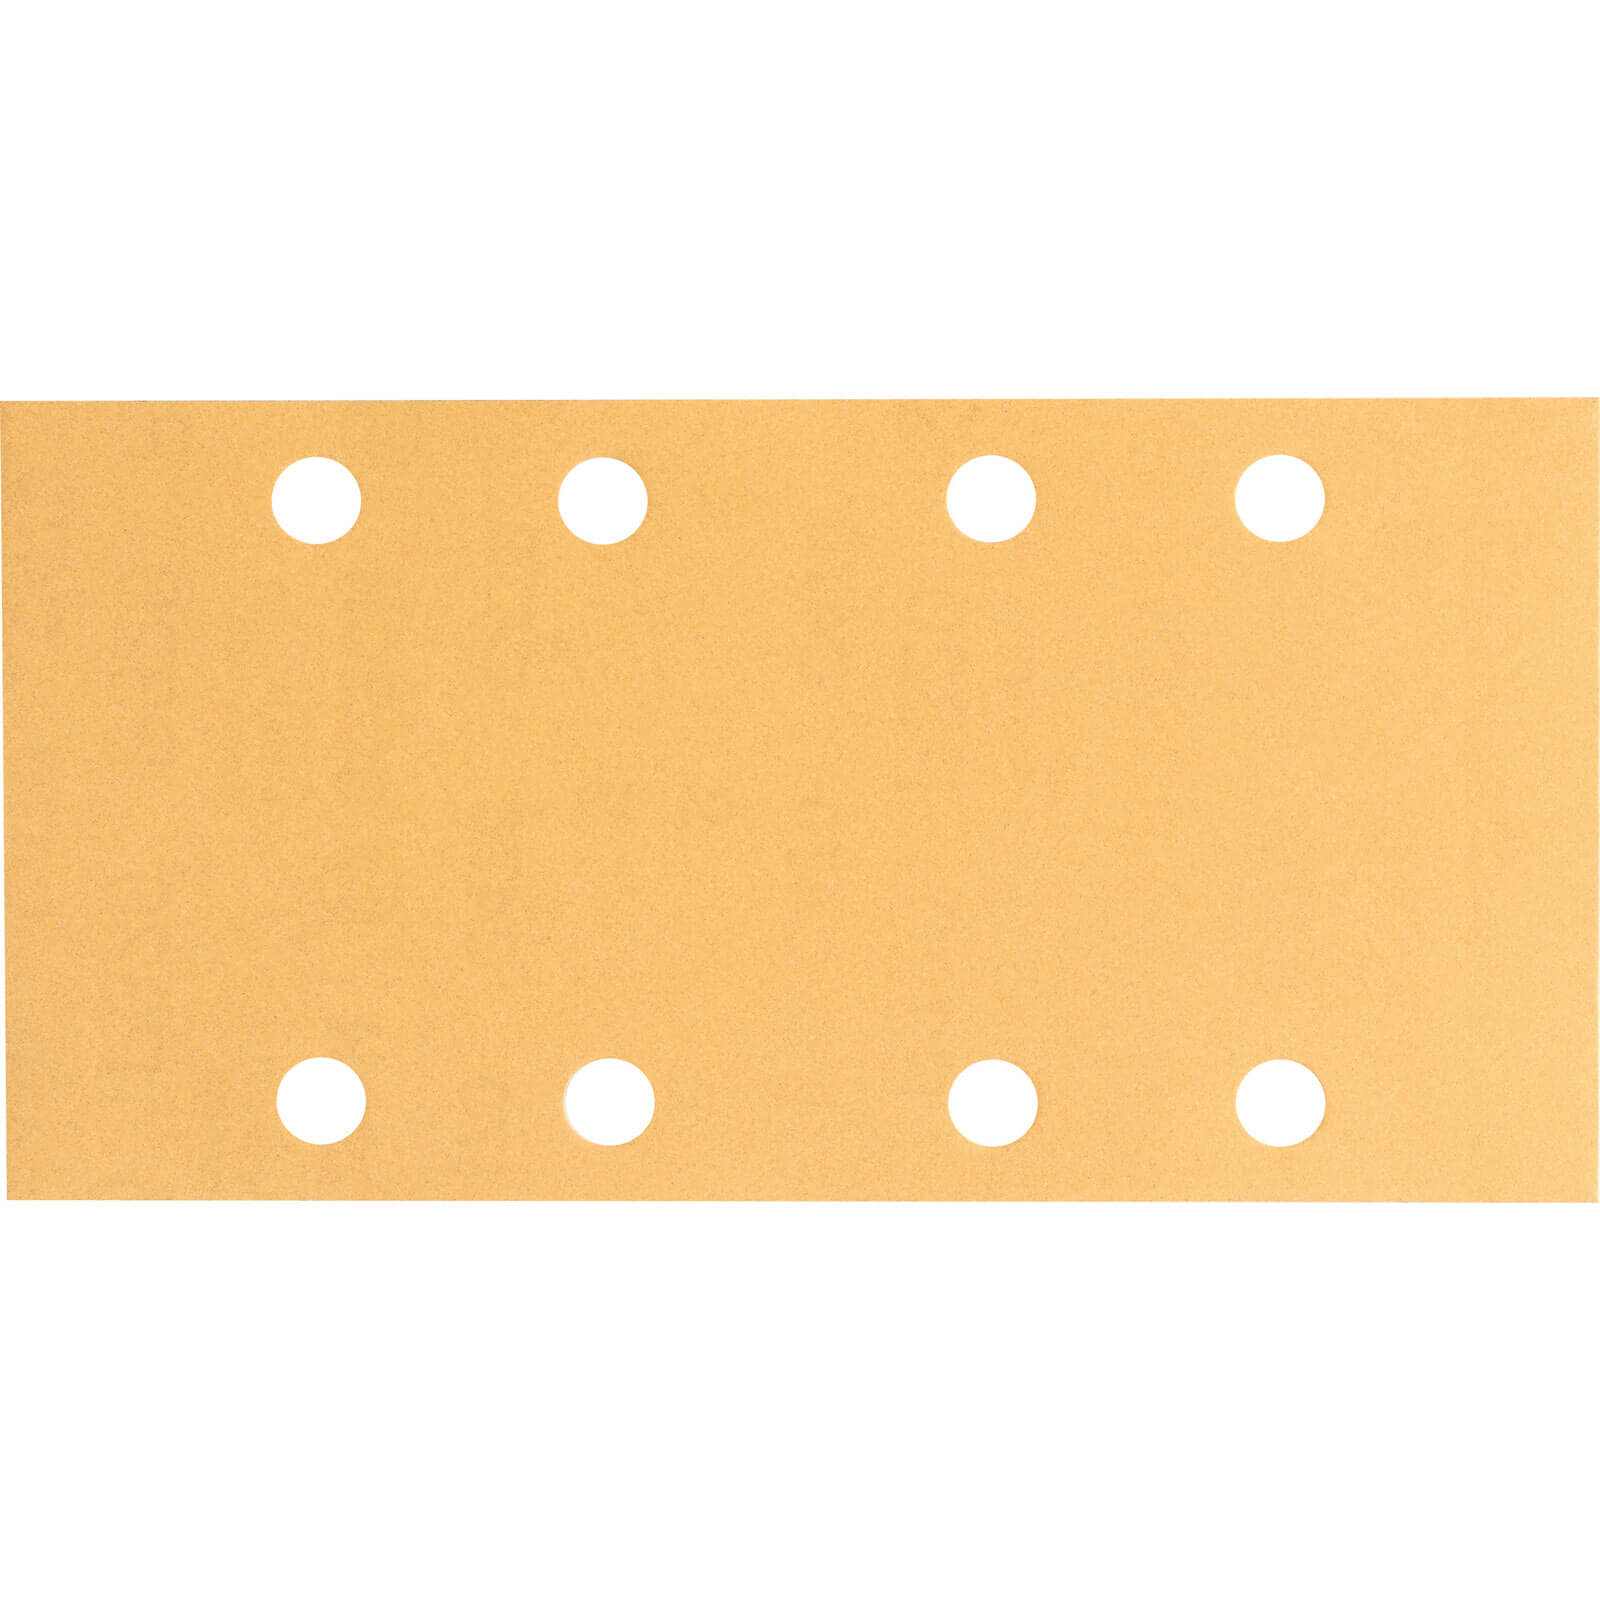 Image of Bosch Punched Hook and Loop Sanding Sheets 93mm x 186mm 180g Pack of 10